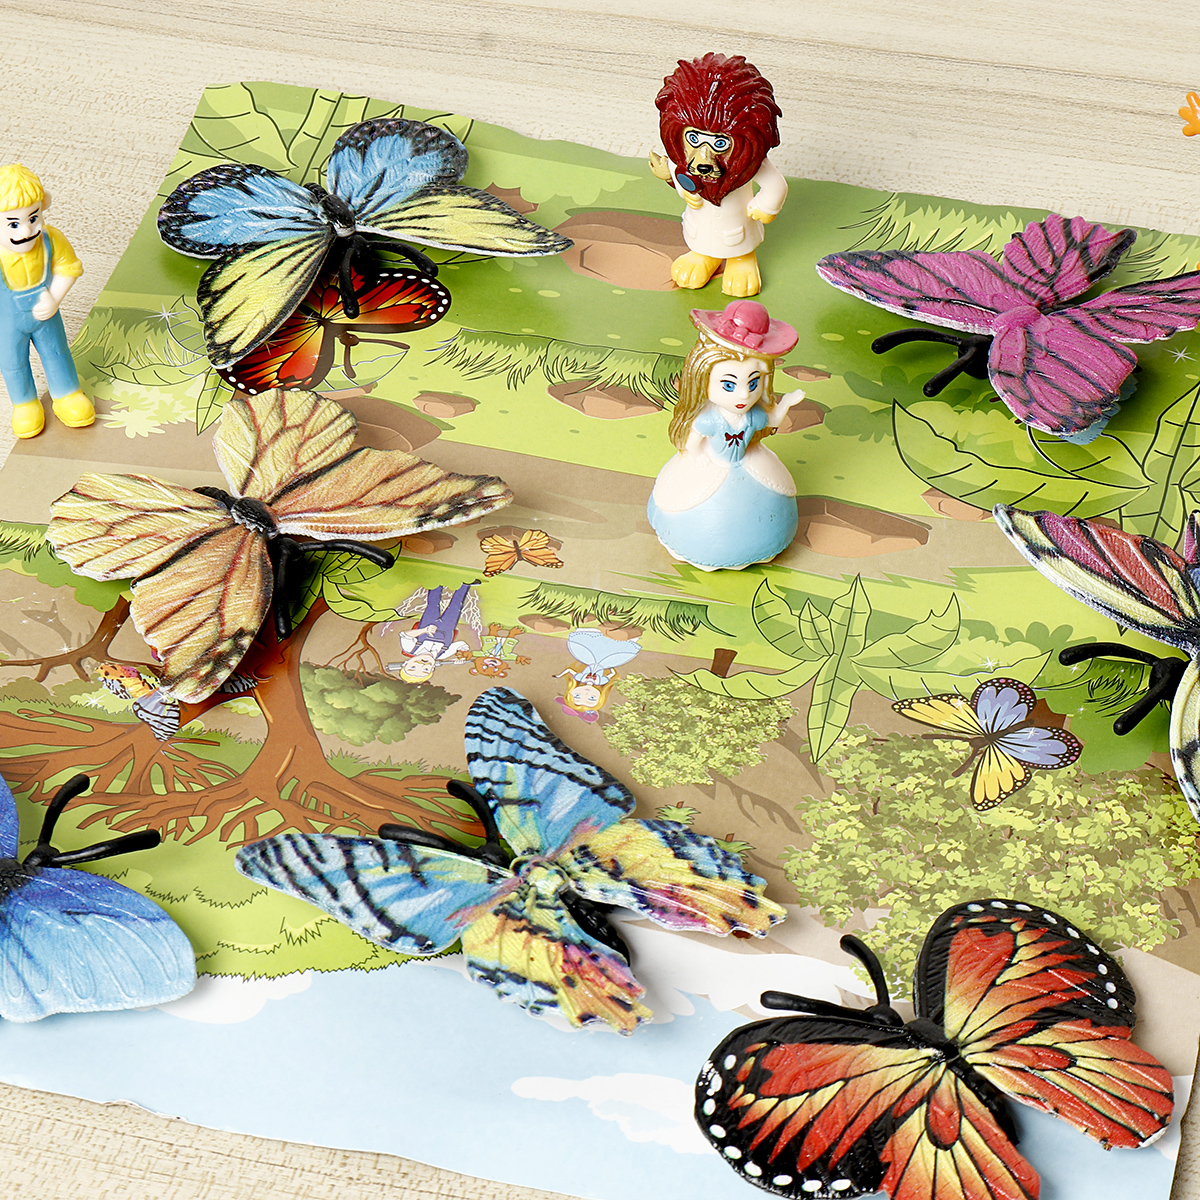 14-Pcs-High-Simulation-Colorful-Realistic-Insects-Butterfly-Animal-Figure-Doll-Model-Learning-Educat-1851298-7